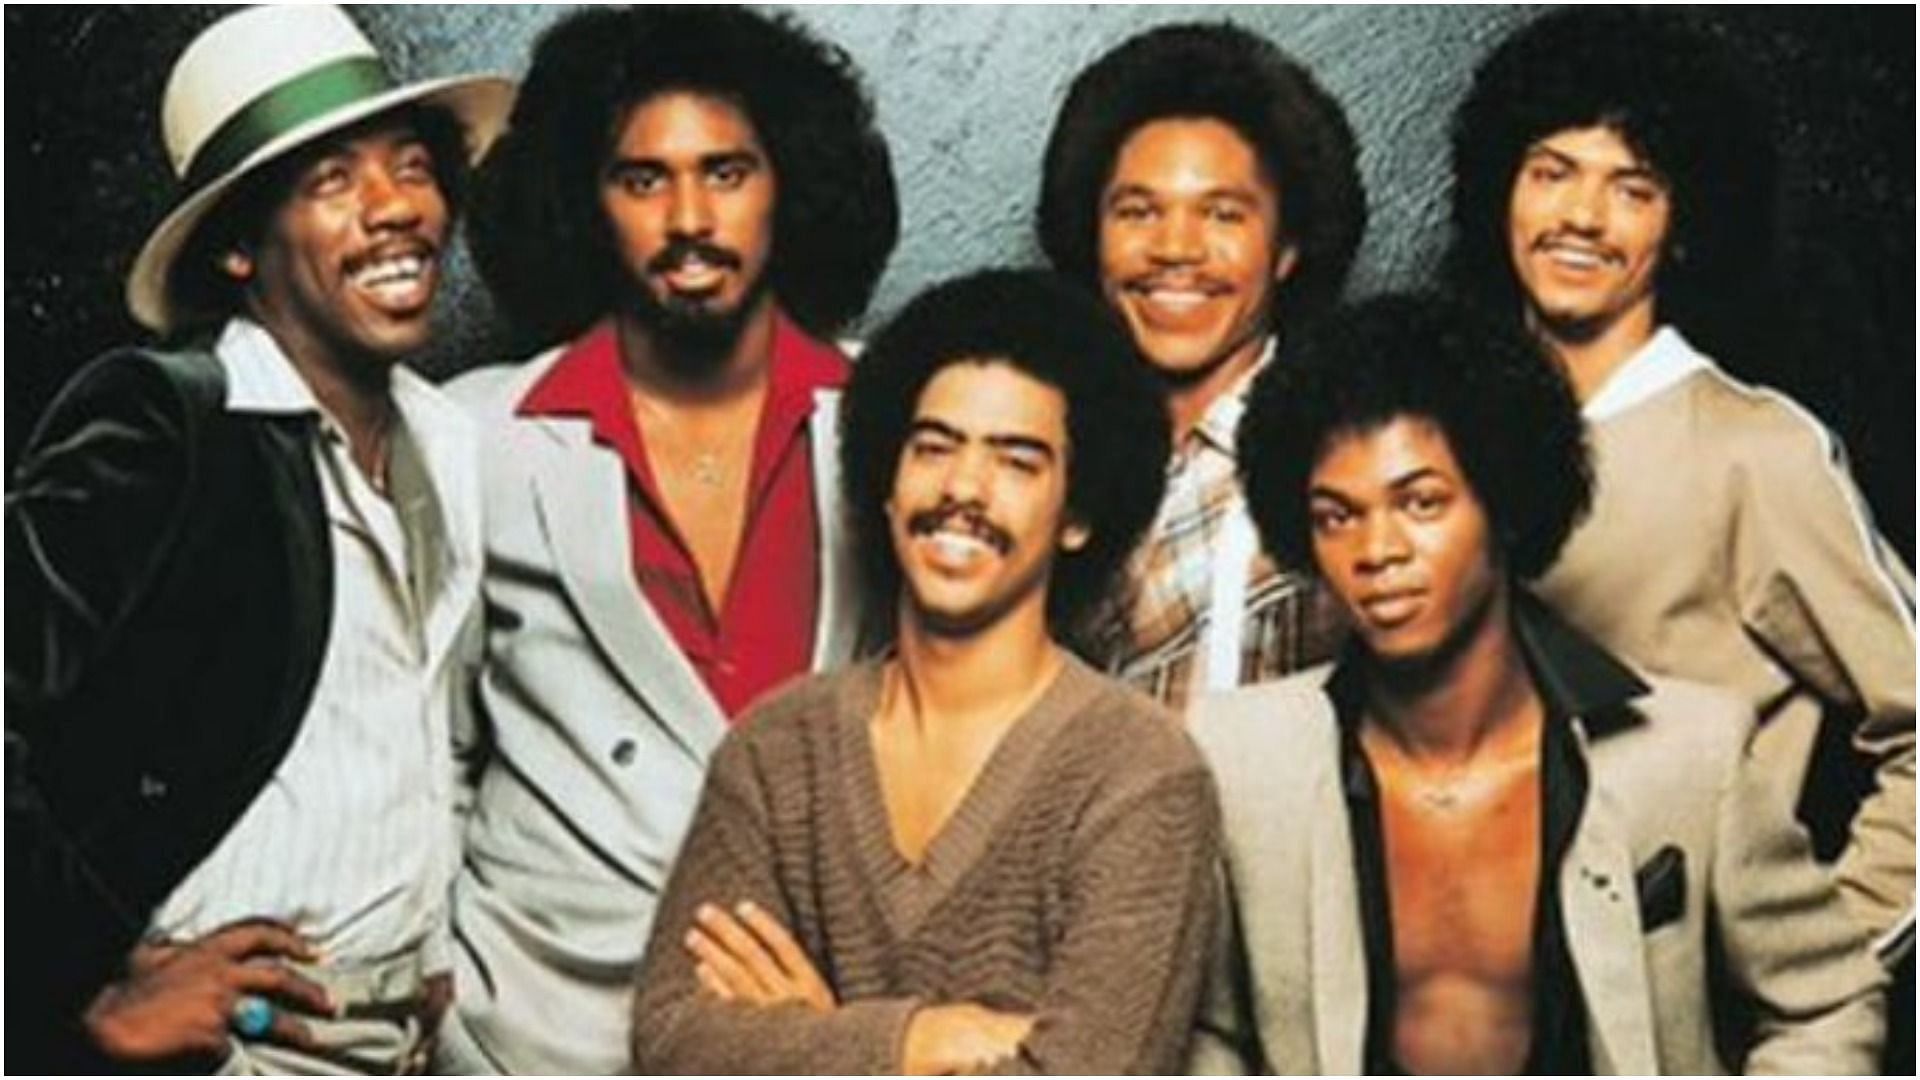 Tommy DeBarge was a member of the band, Switch (Image via theGrio/Twitter)